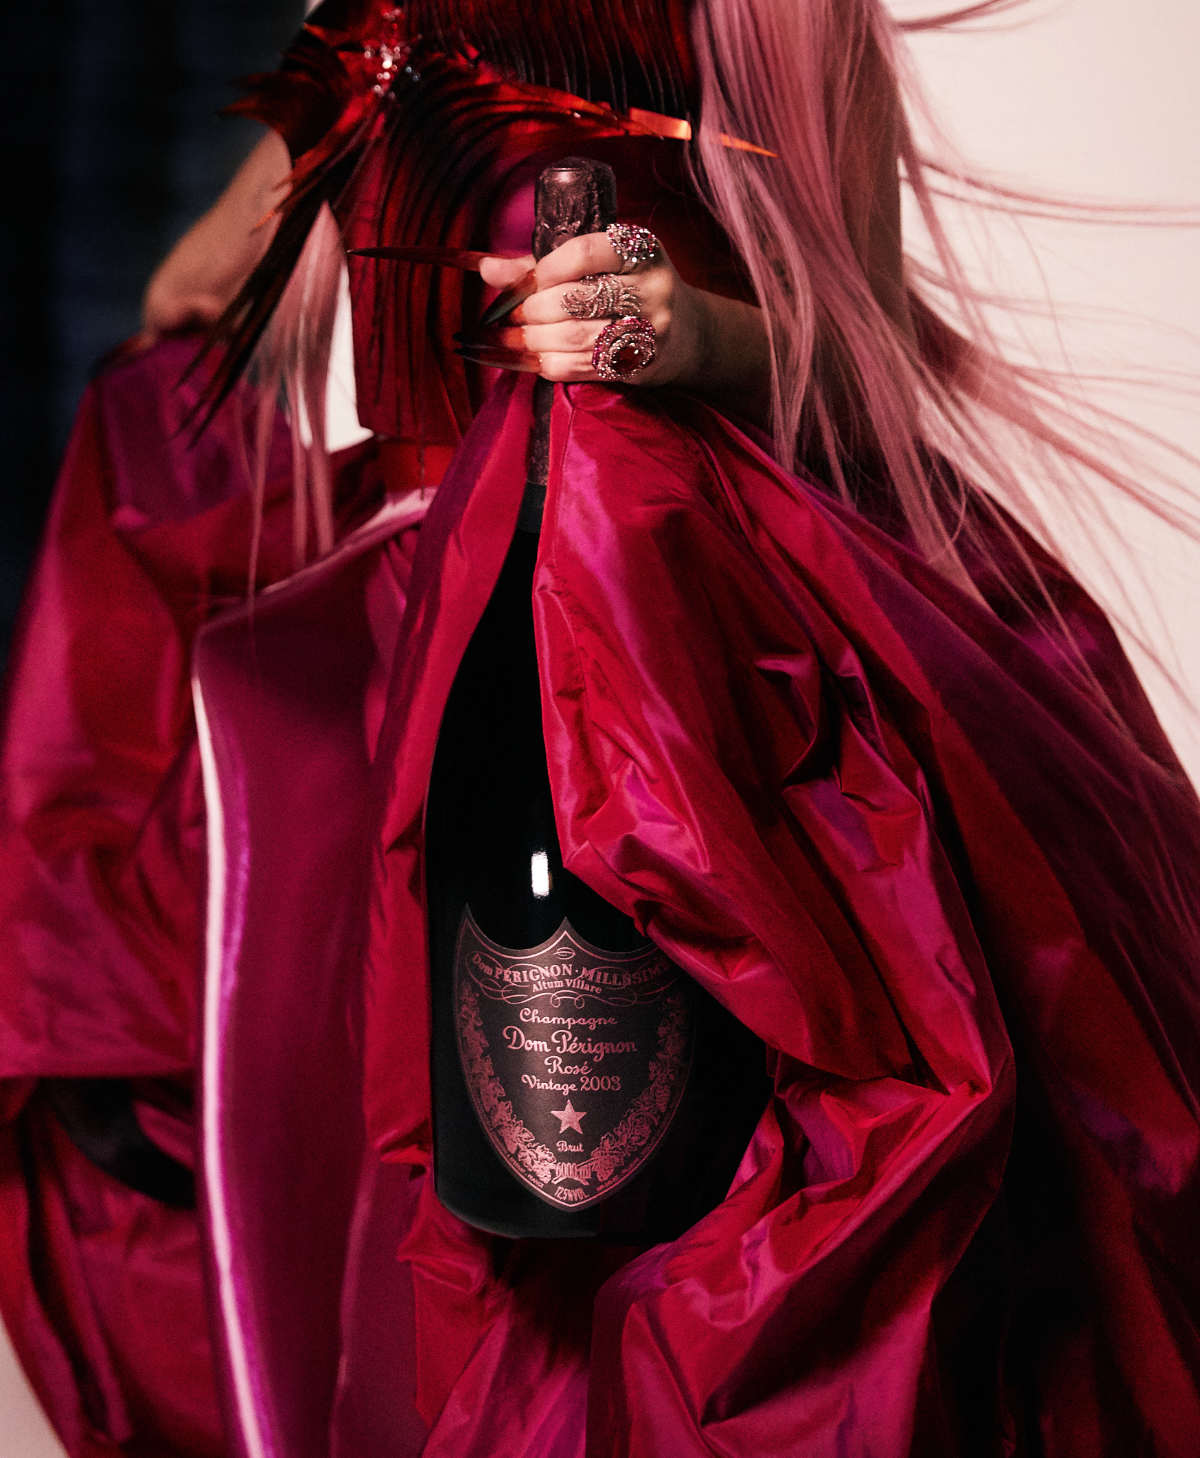 Dom Pérignon X Lady Gaga - This Is The Story Of Two Creative Forces